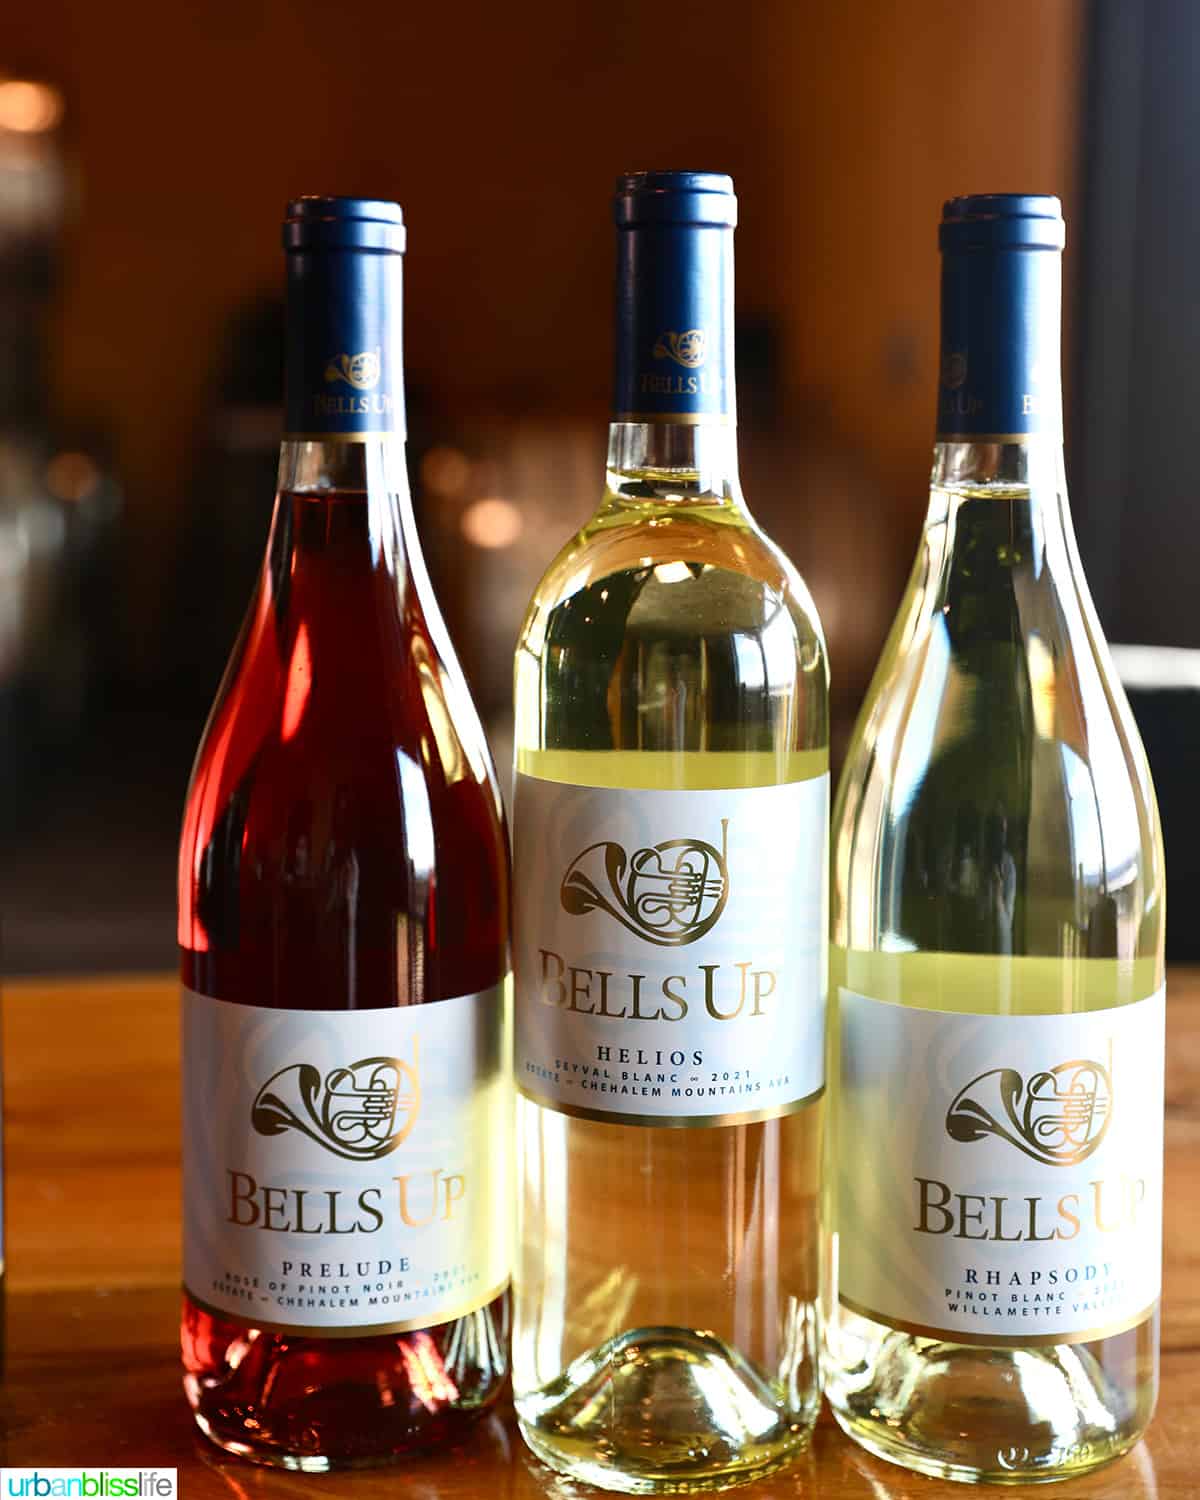 Bottle of Rosé wine, two bottles of white wines, all with Bells Up Winery labels.